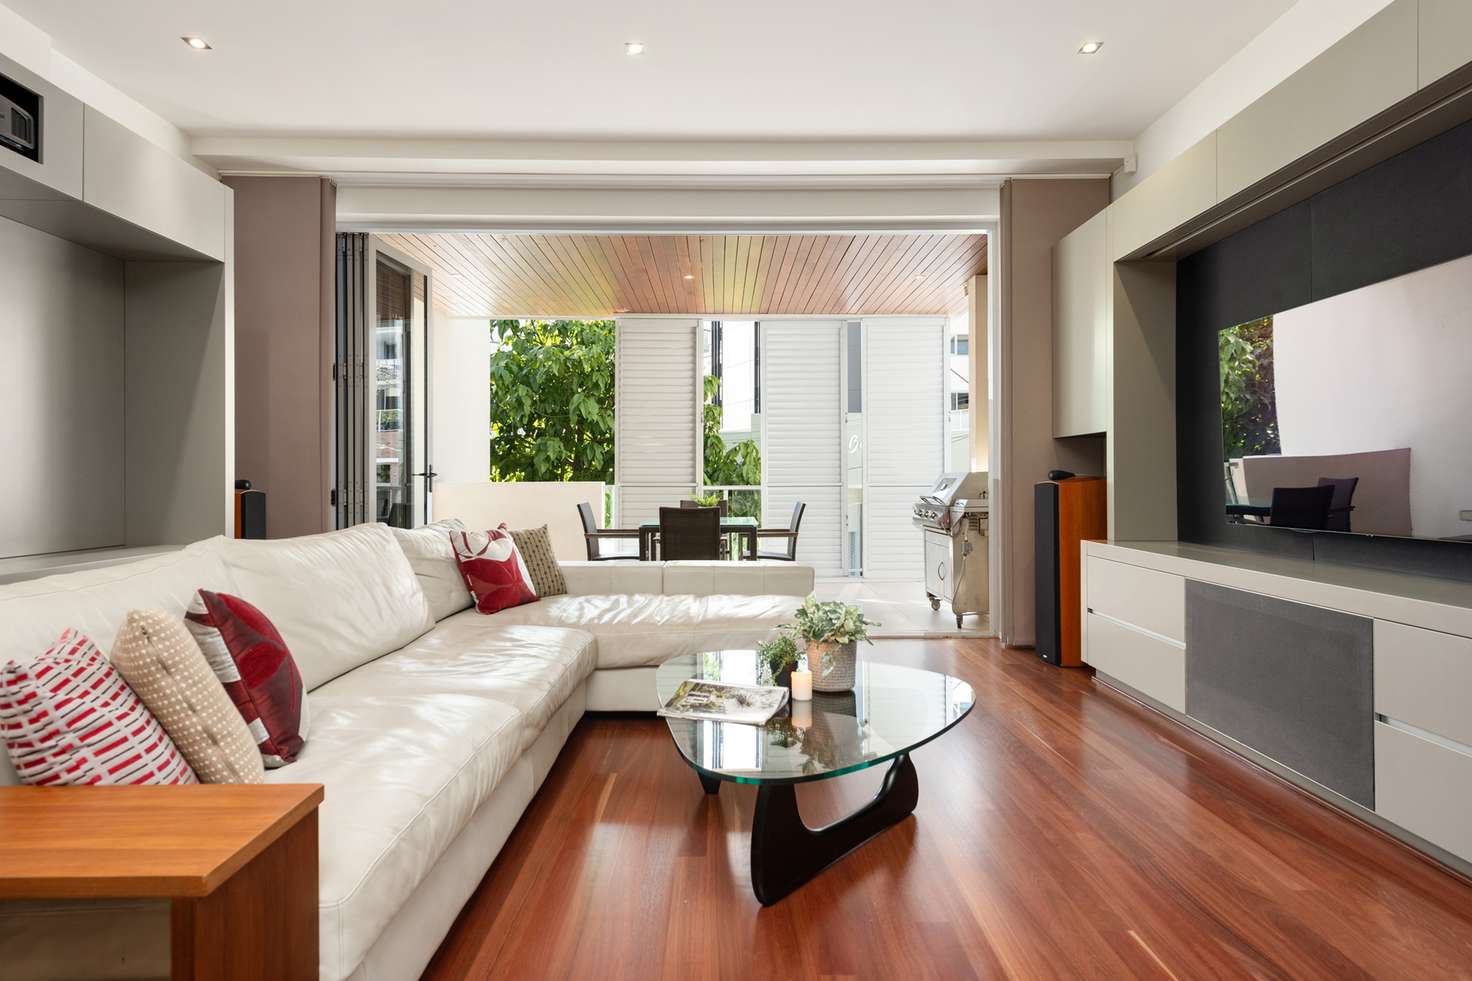 Main view of Homely apartment listing, 2/35 Wyandra Street, Teneriffe QLD 4005